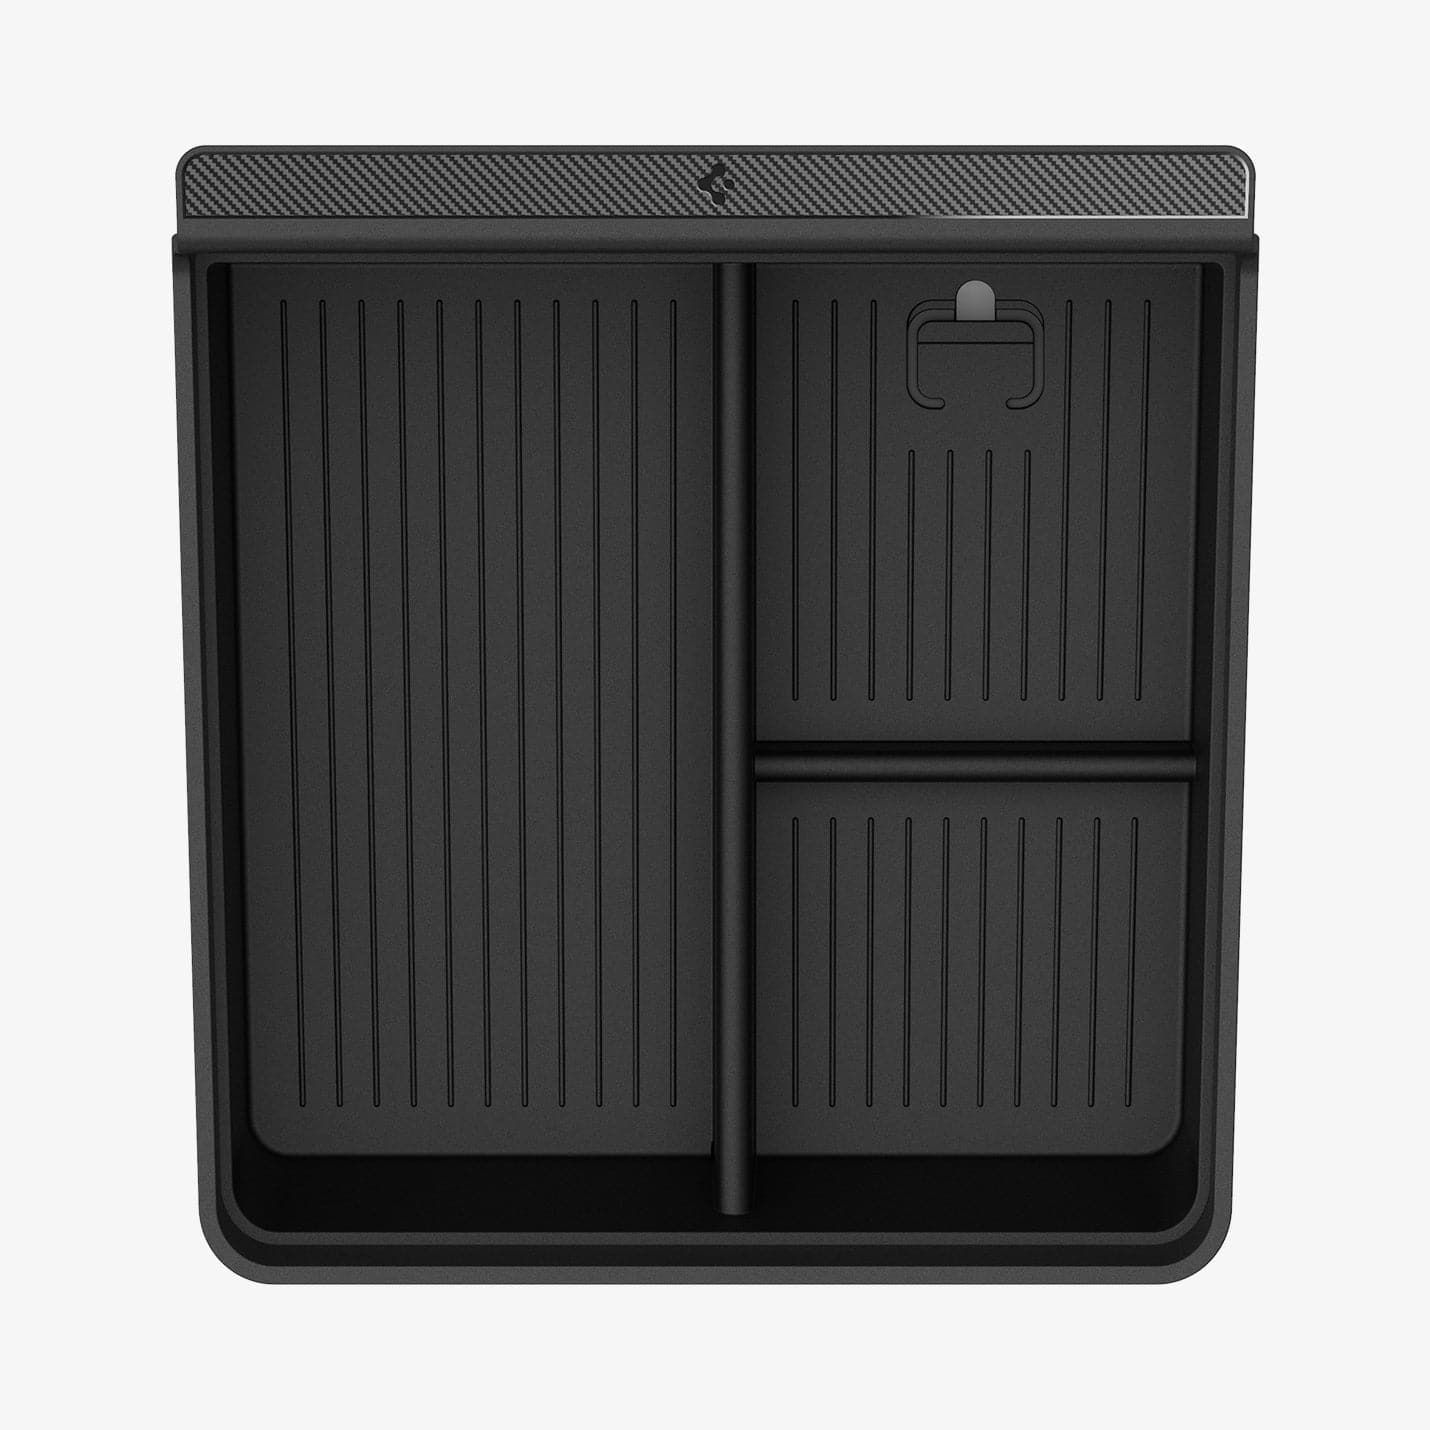 ACP06952 - Tesla Model S & X Center Console Organizer Tray in black showing the top view